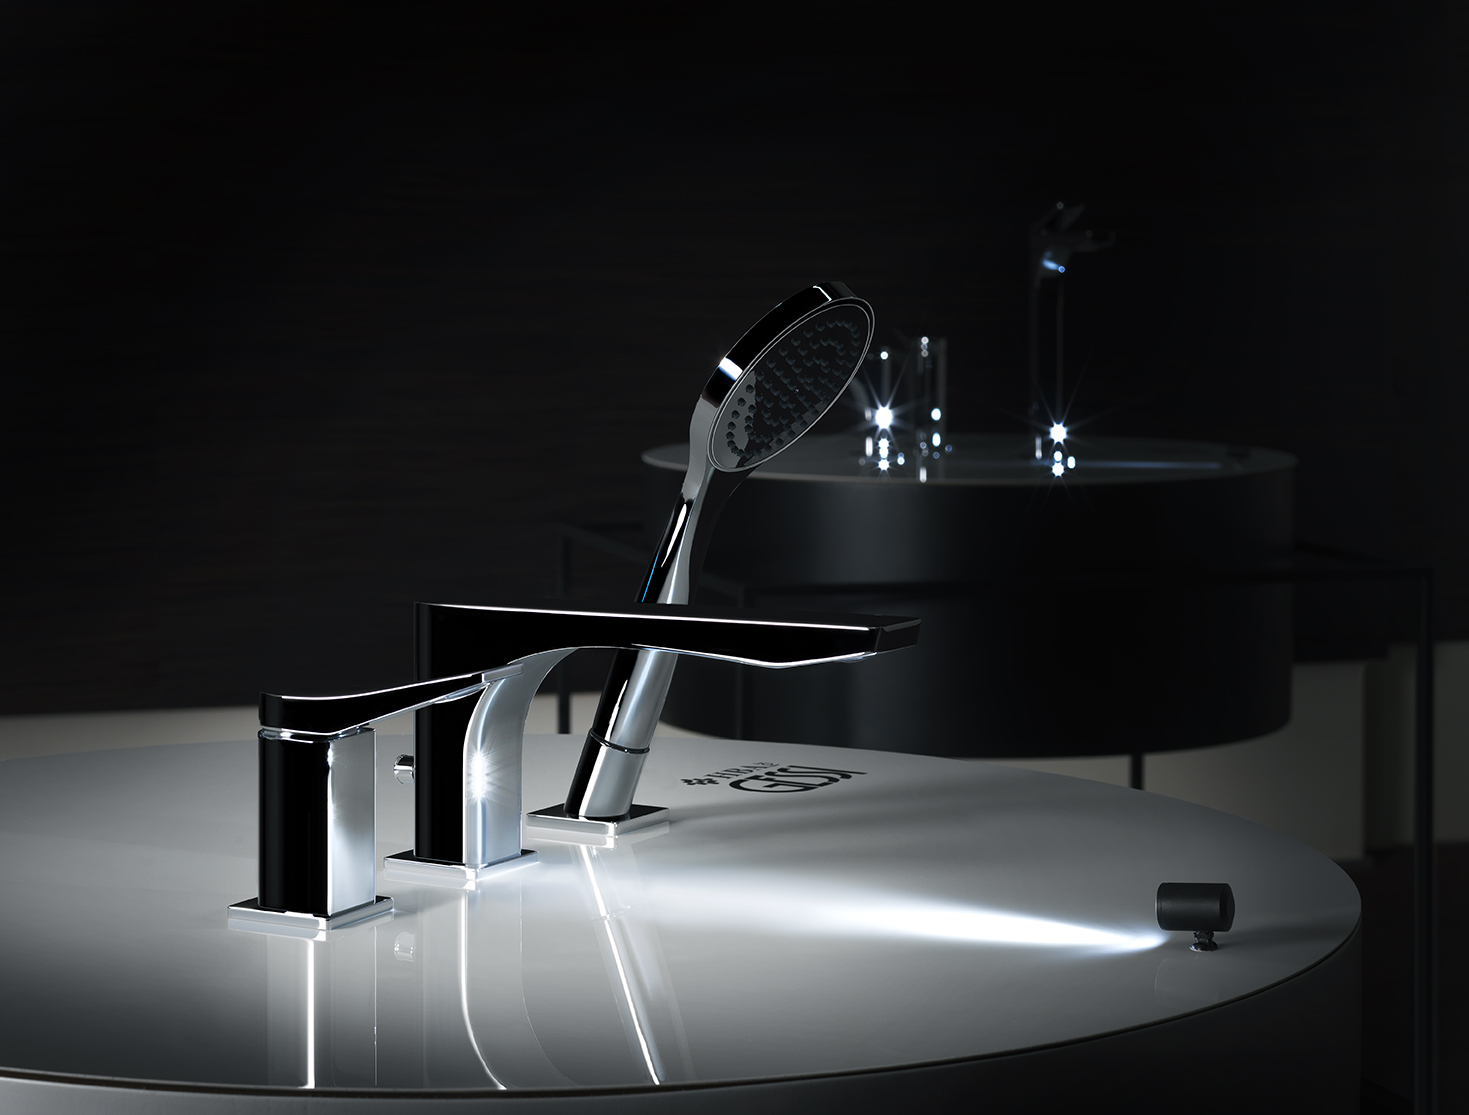 HBA Products partnership with Gessi promotes wellness through design by considering both object and space as complementary